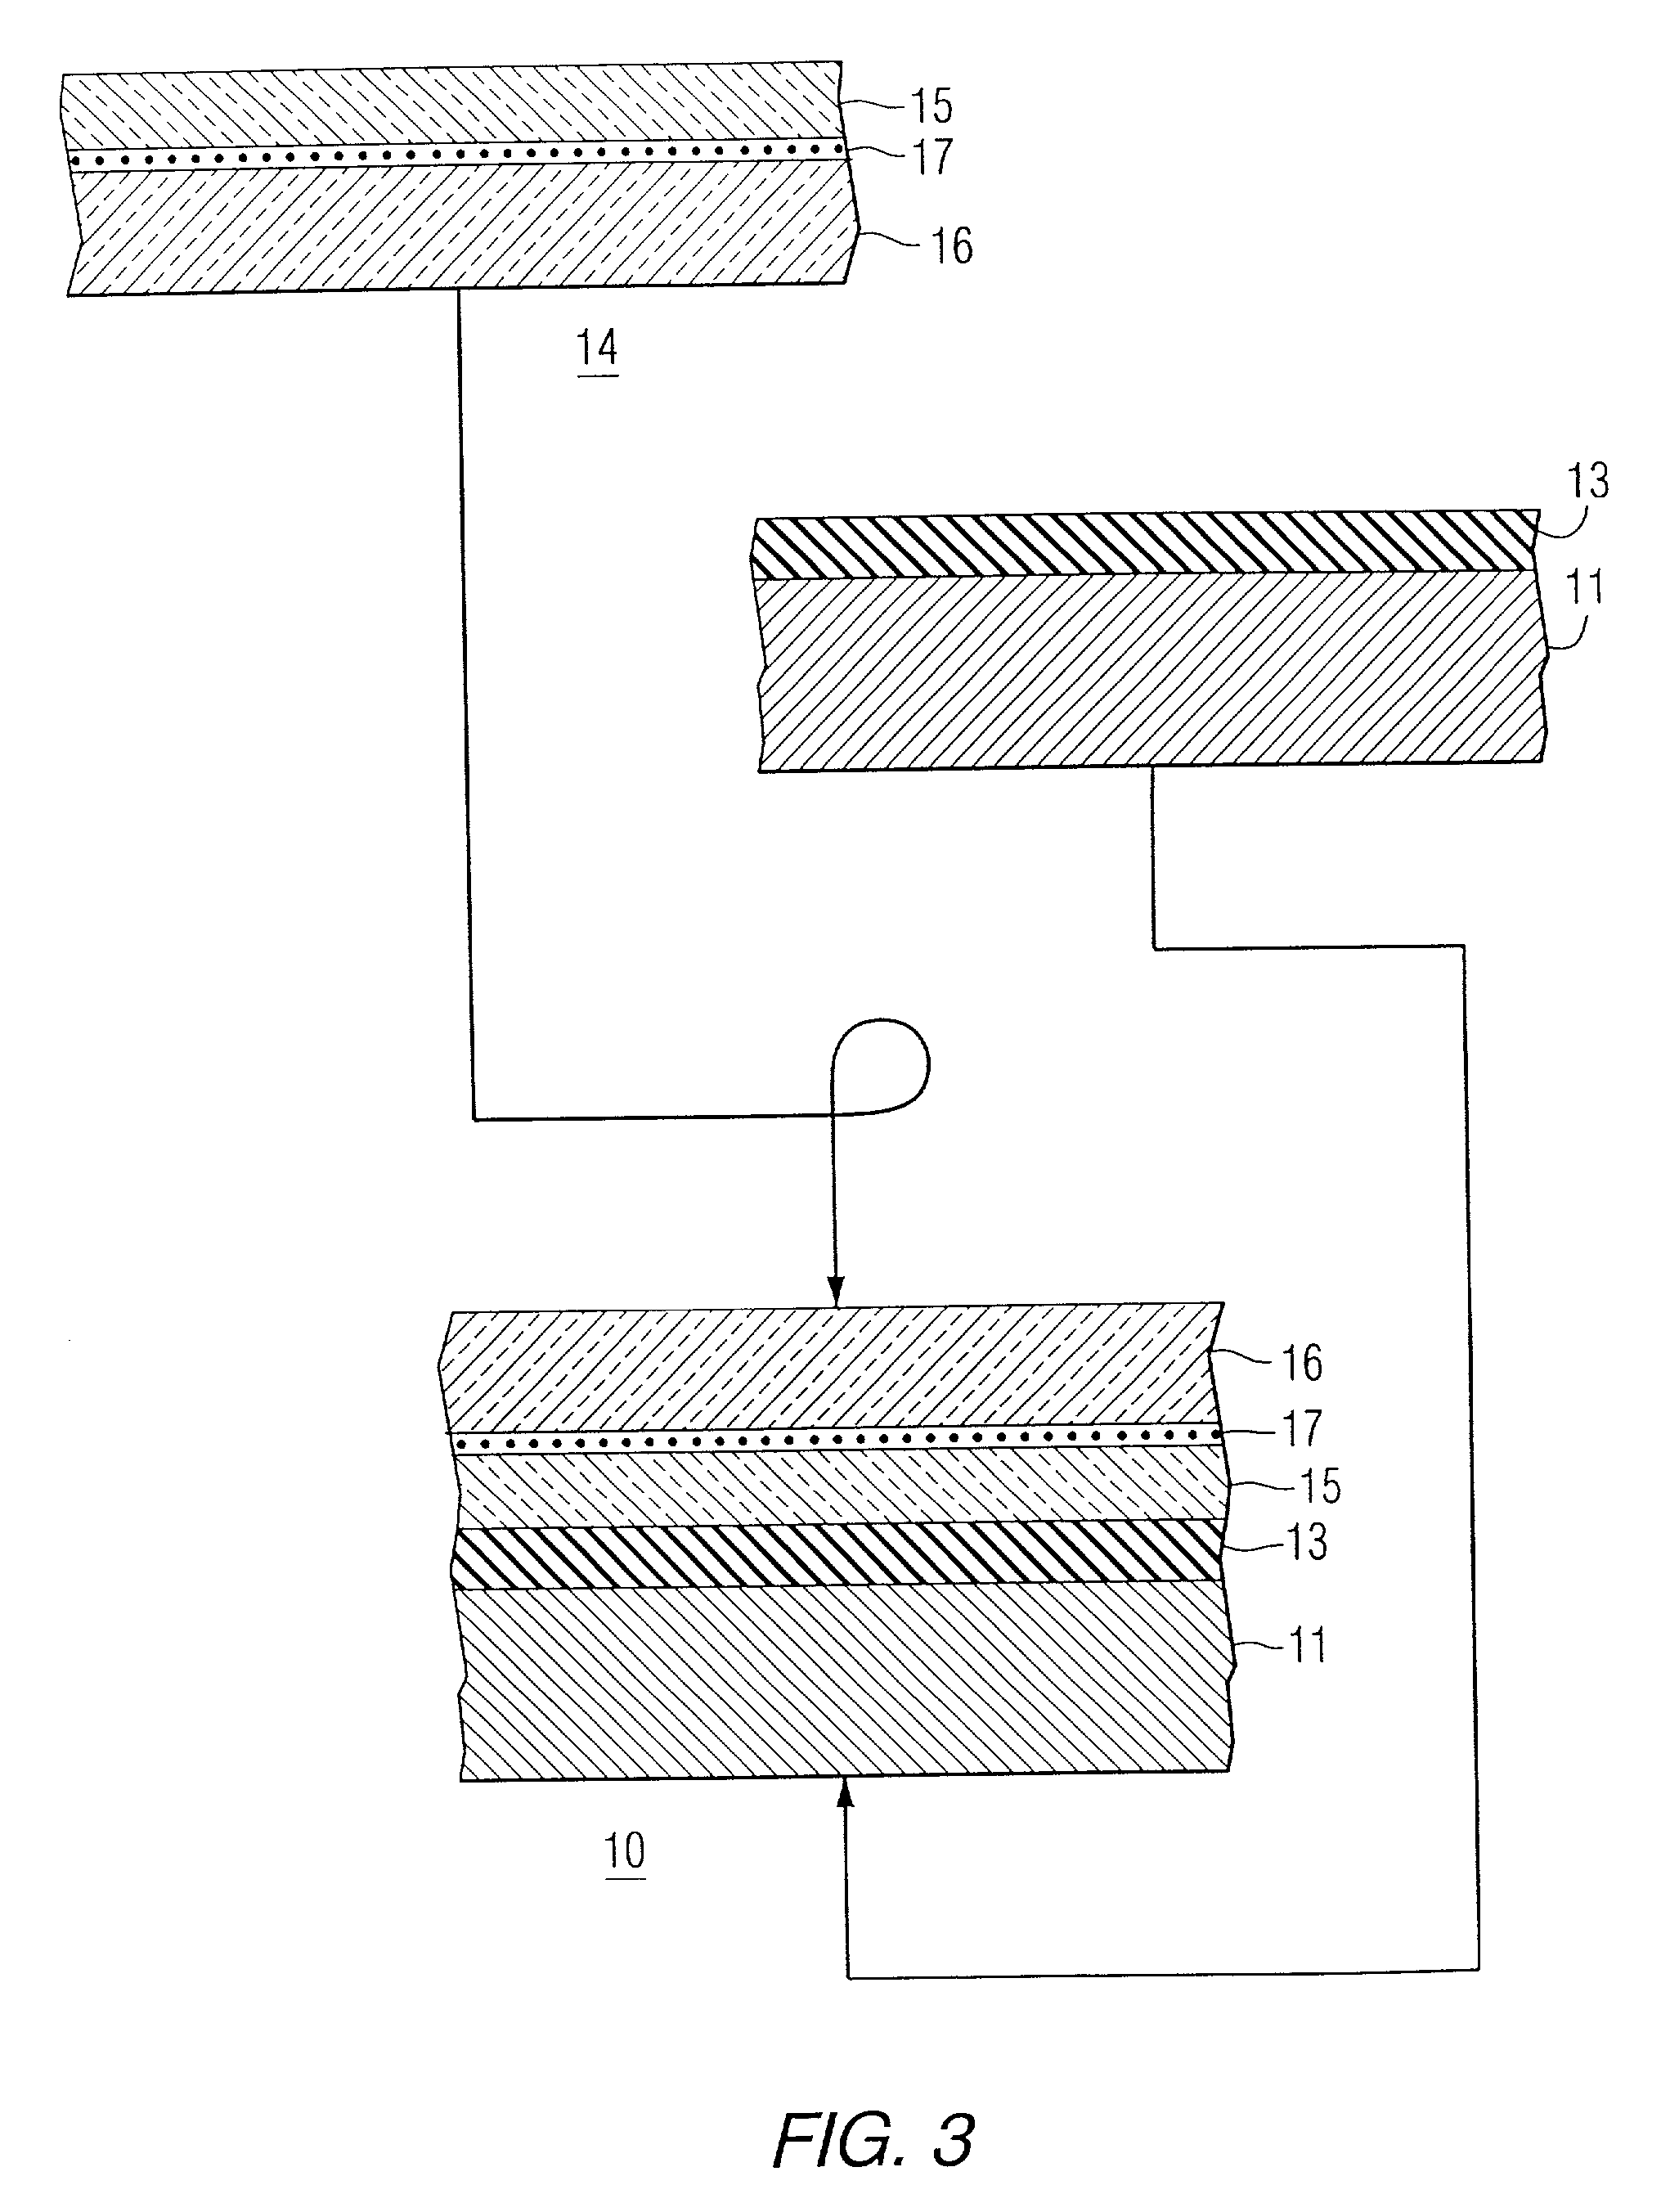 Method for forming a bonded substrate containing a planar intrinsic gettering zone and substrate formed by said method